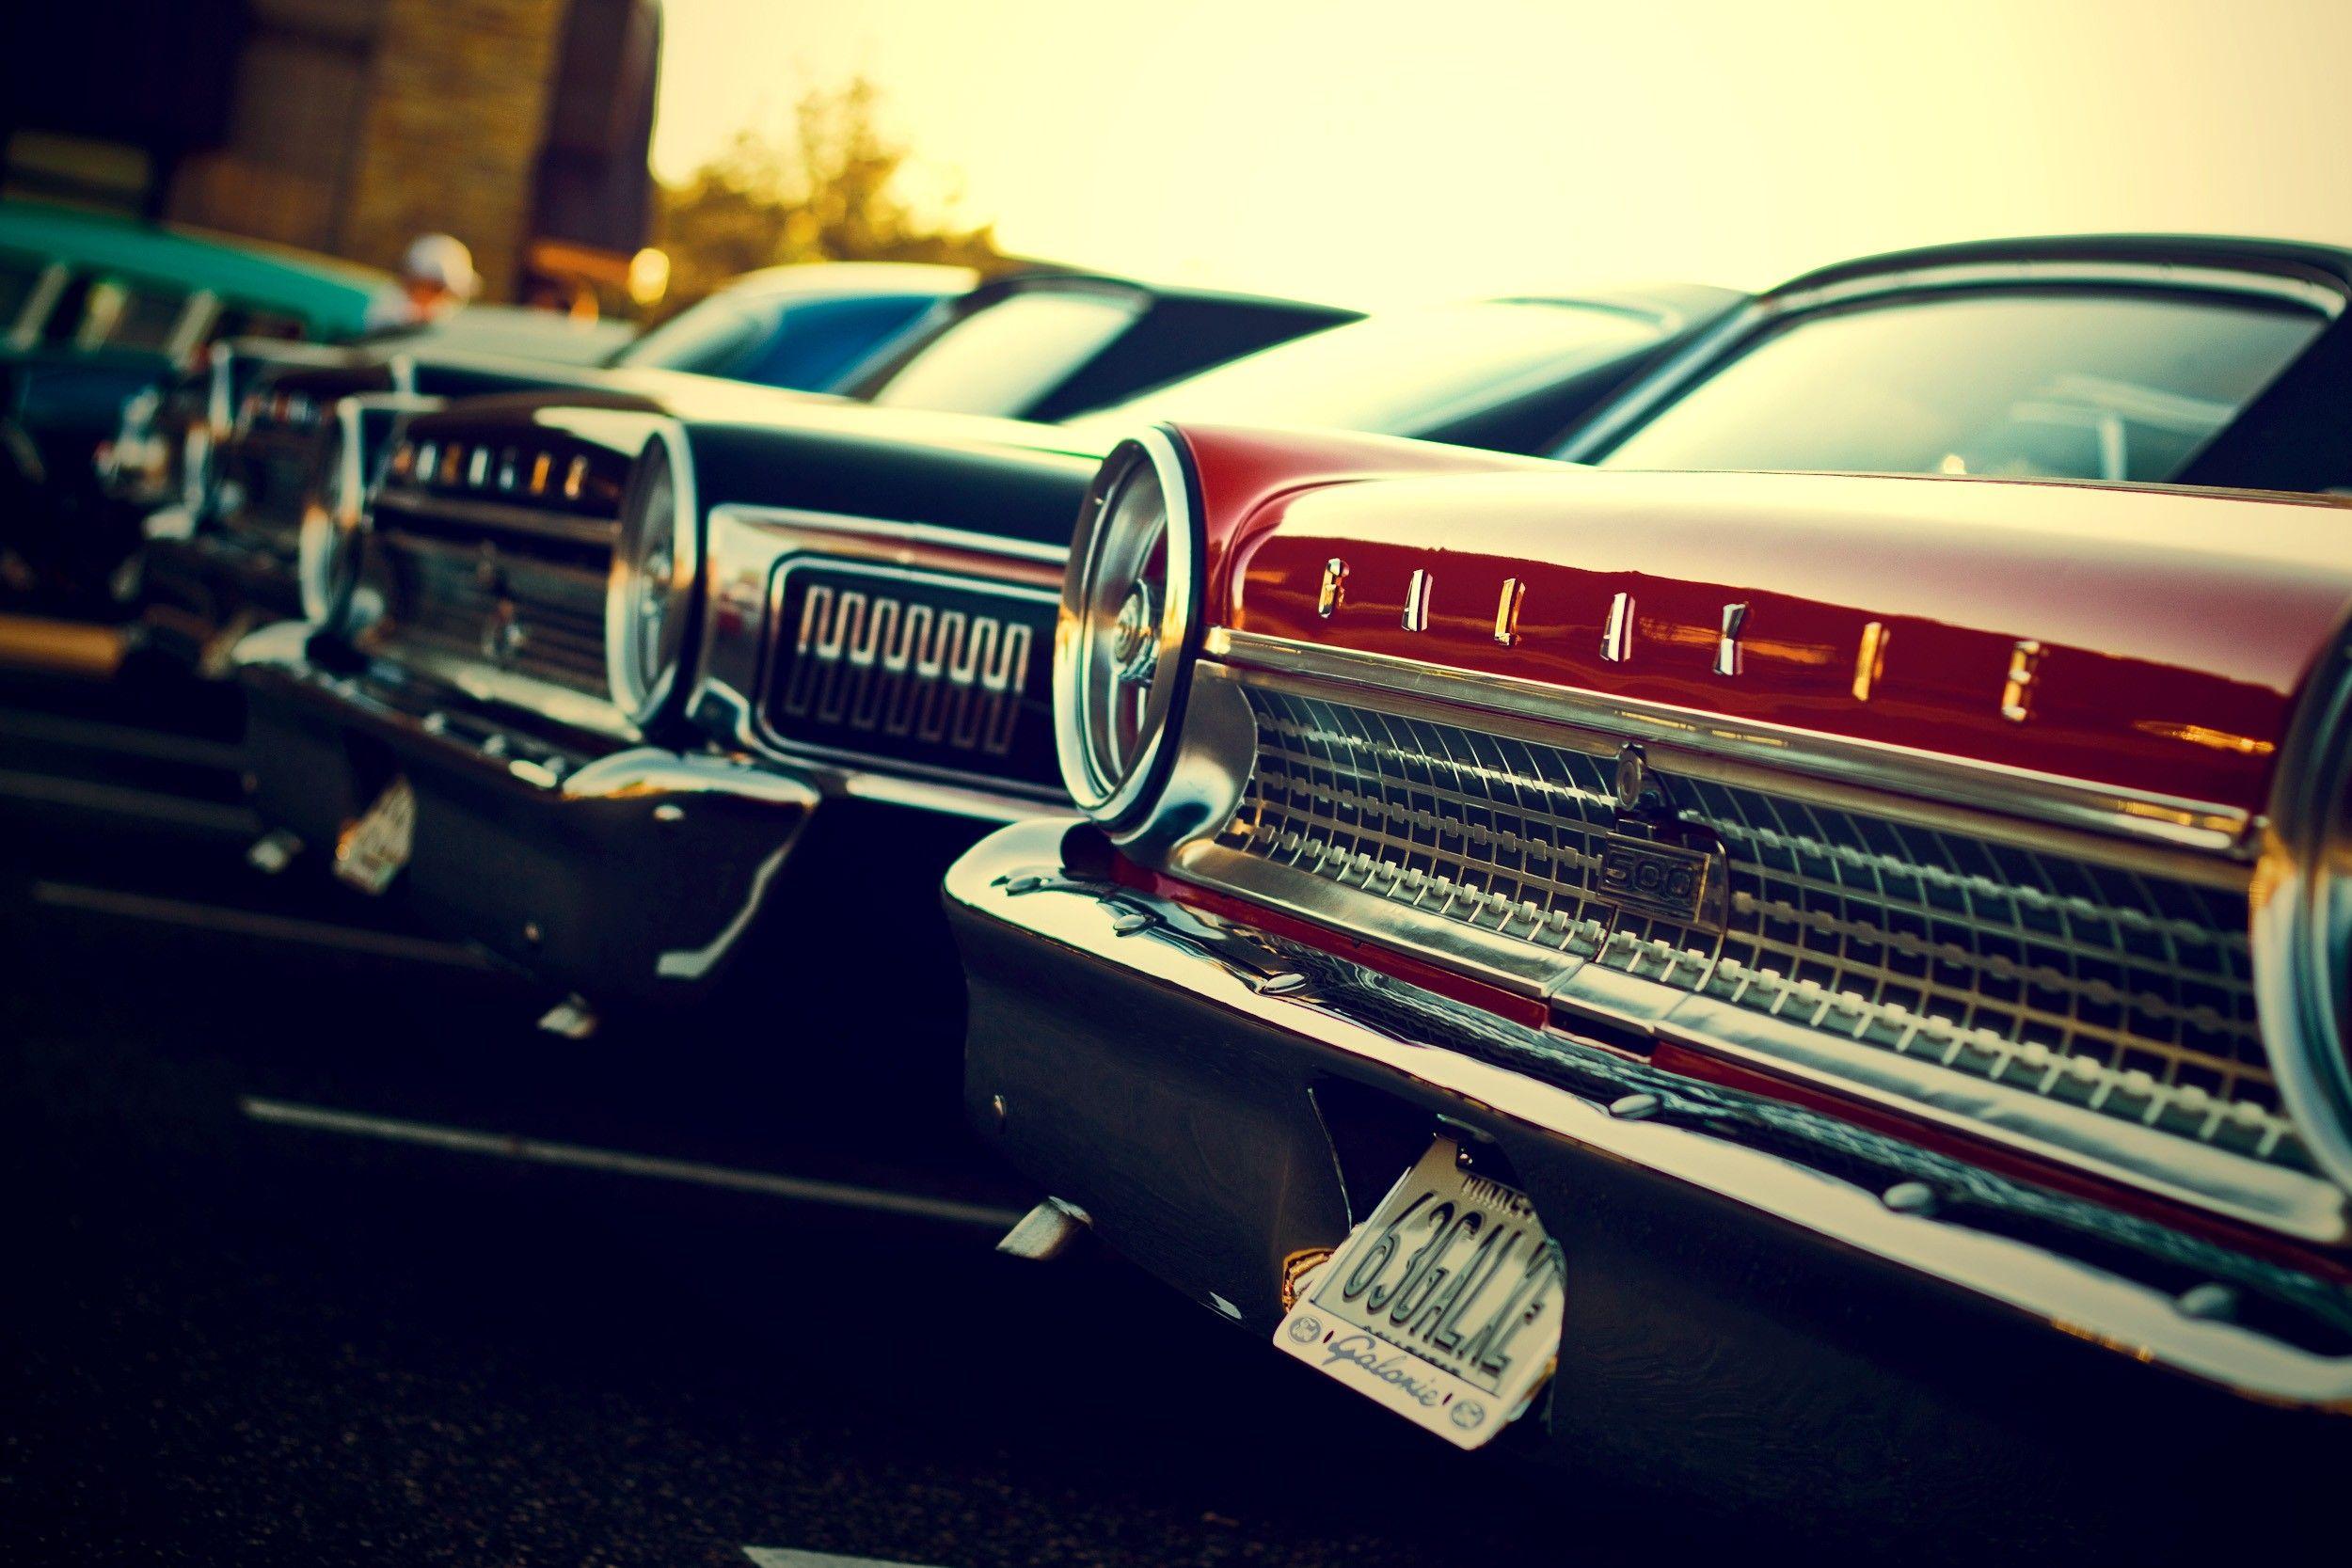 cars, photography, vehicles, old cars, front view, american cars